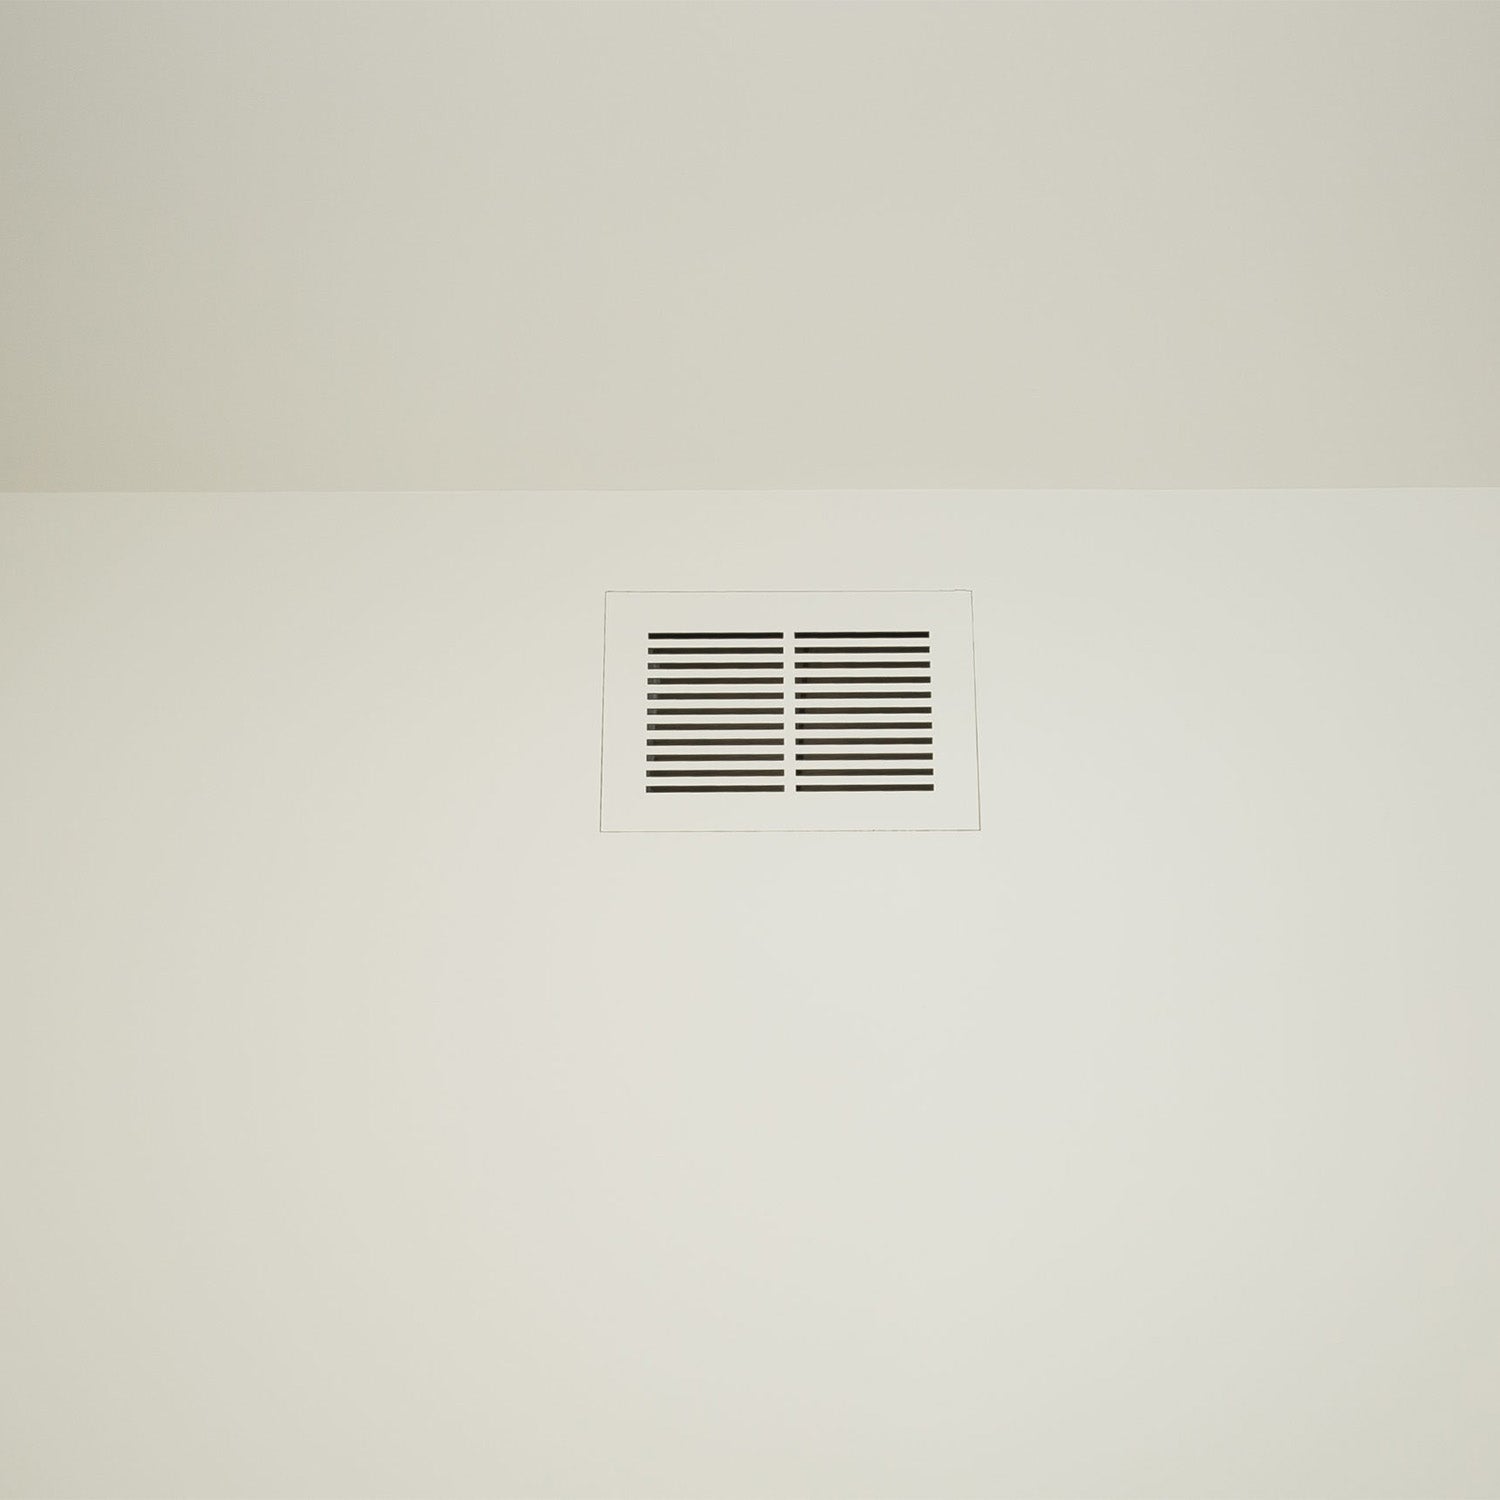 ENVISIVENT (CB5003) – Removable Magnetic Mud-In Flush Mounted Wall Air Return Vent, 14” x 8” Duct